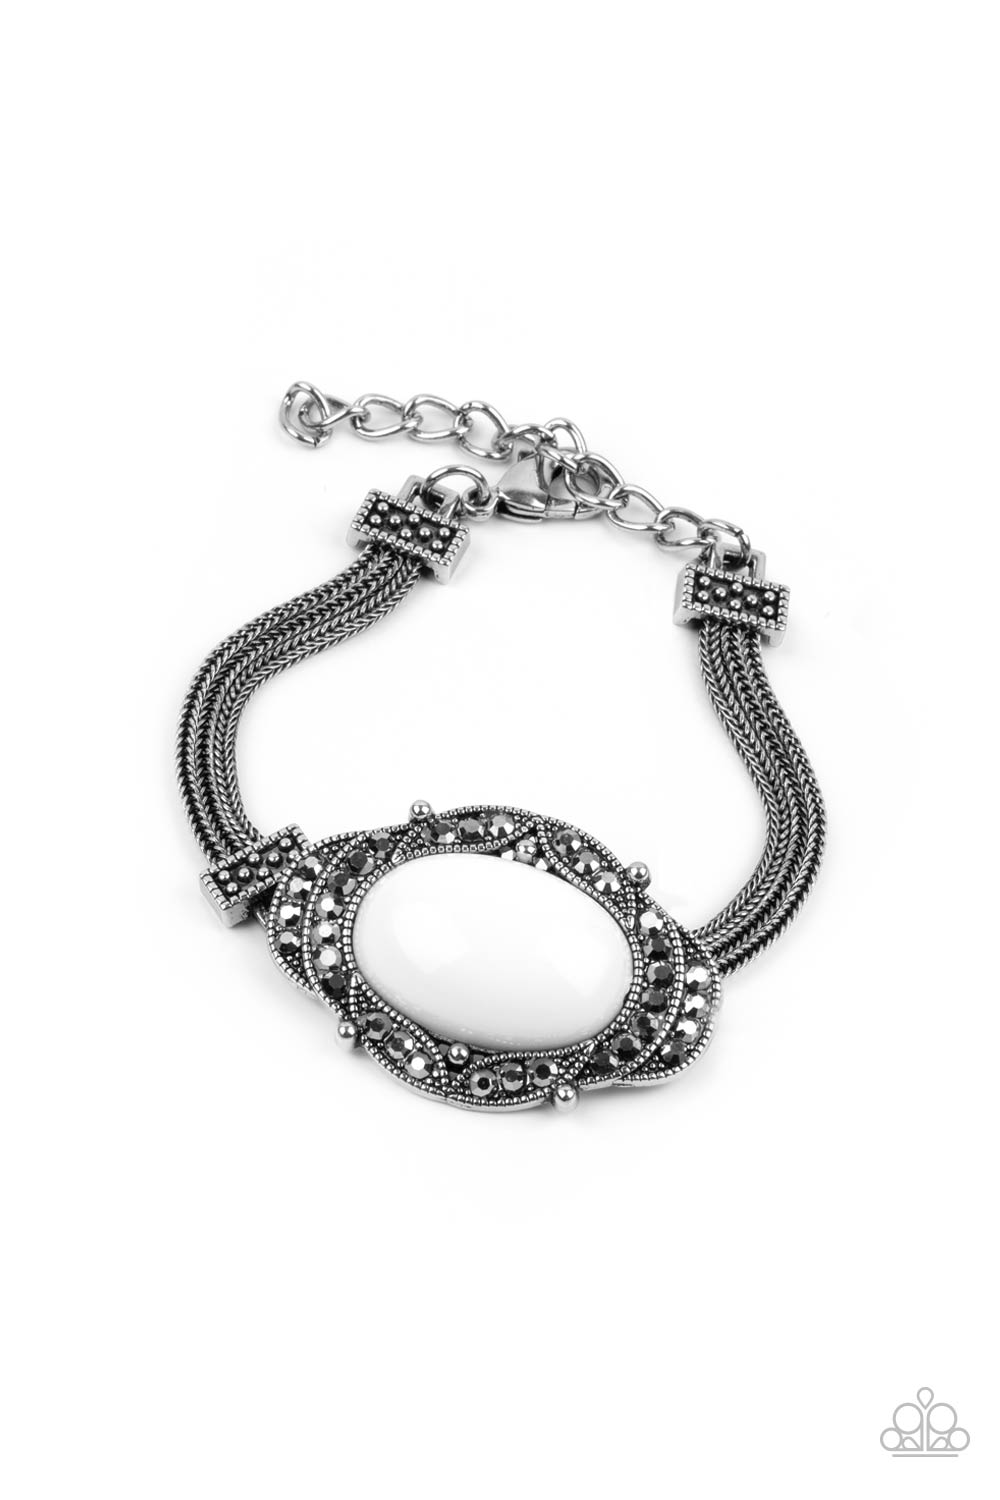 Hematite encrusted silver frames delicately overlap around an oval white bead, creating an edgy centerpiece. The colorful centerpiece attaches to strands of ornate silver chains that are held in place around the wrist by studded silver frames. Features an adjustable clasp closure.